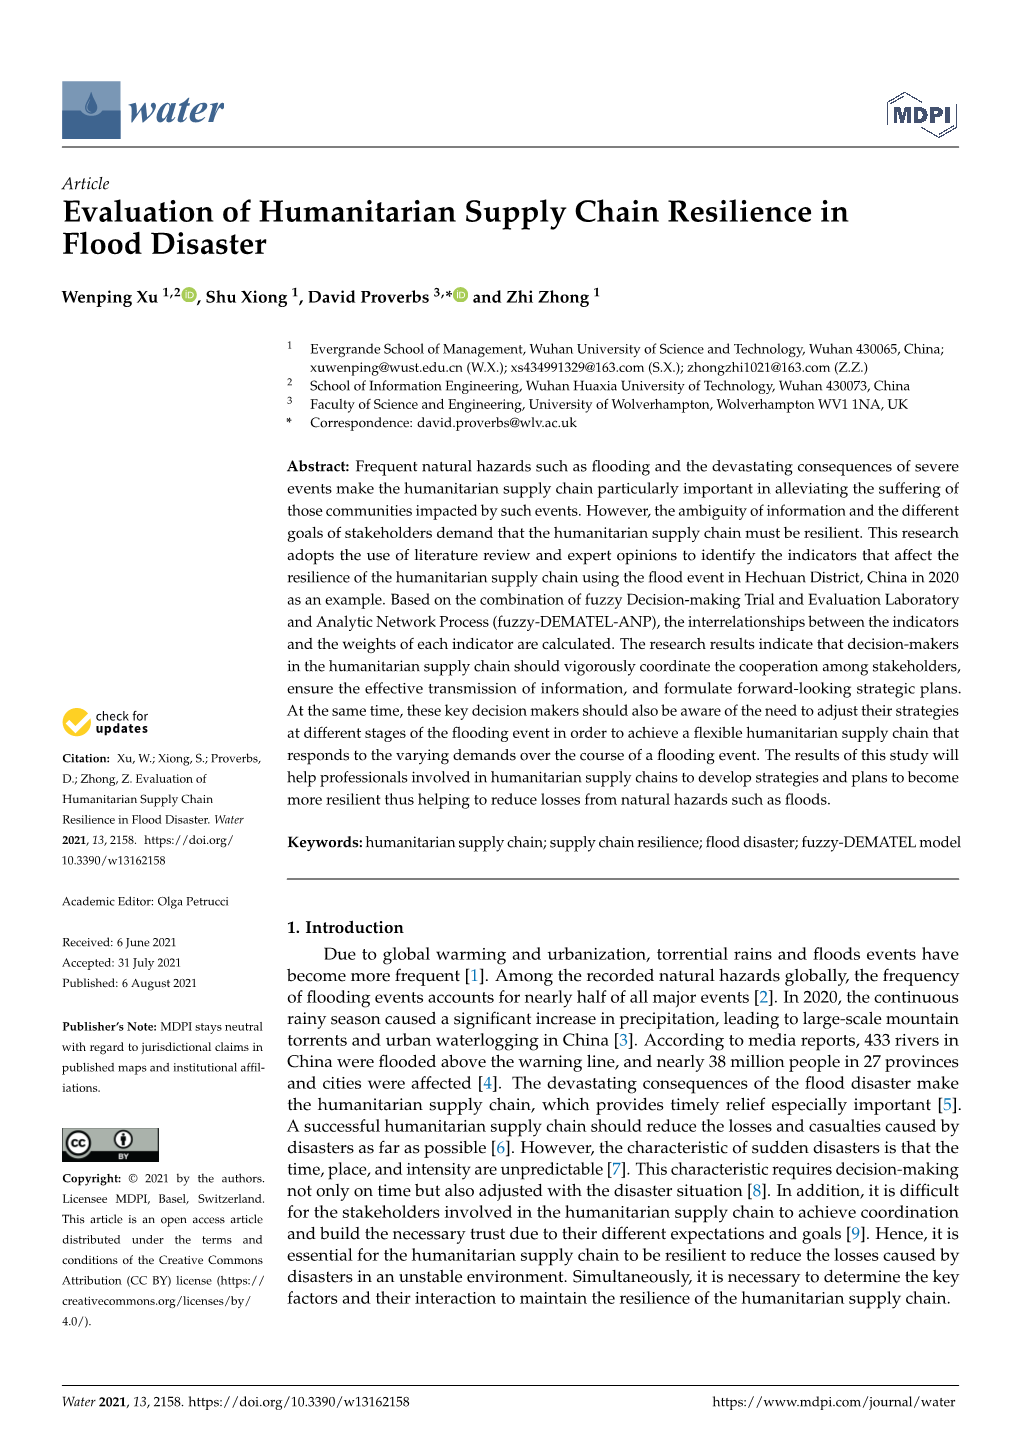 Evaluation of Humanitarian Supply Chain Resilience in Flood Disaster